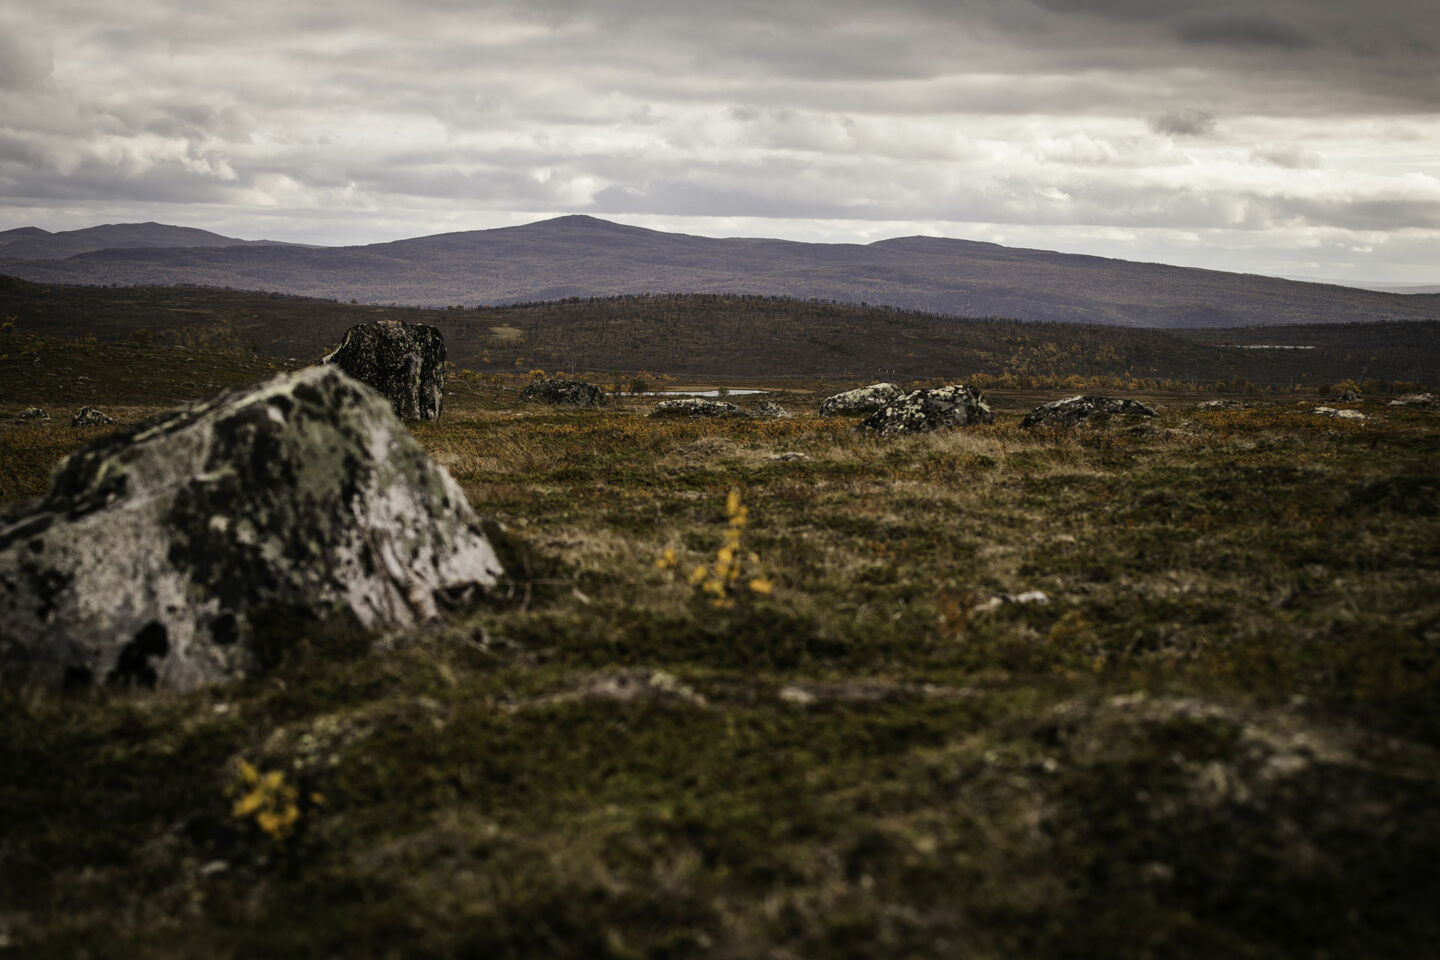 A boulder sits alone on the fellfields of Utsjoki, a Finnish Lapland filming location